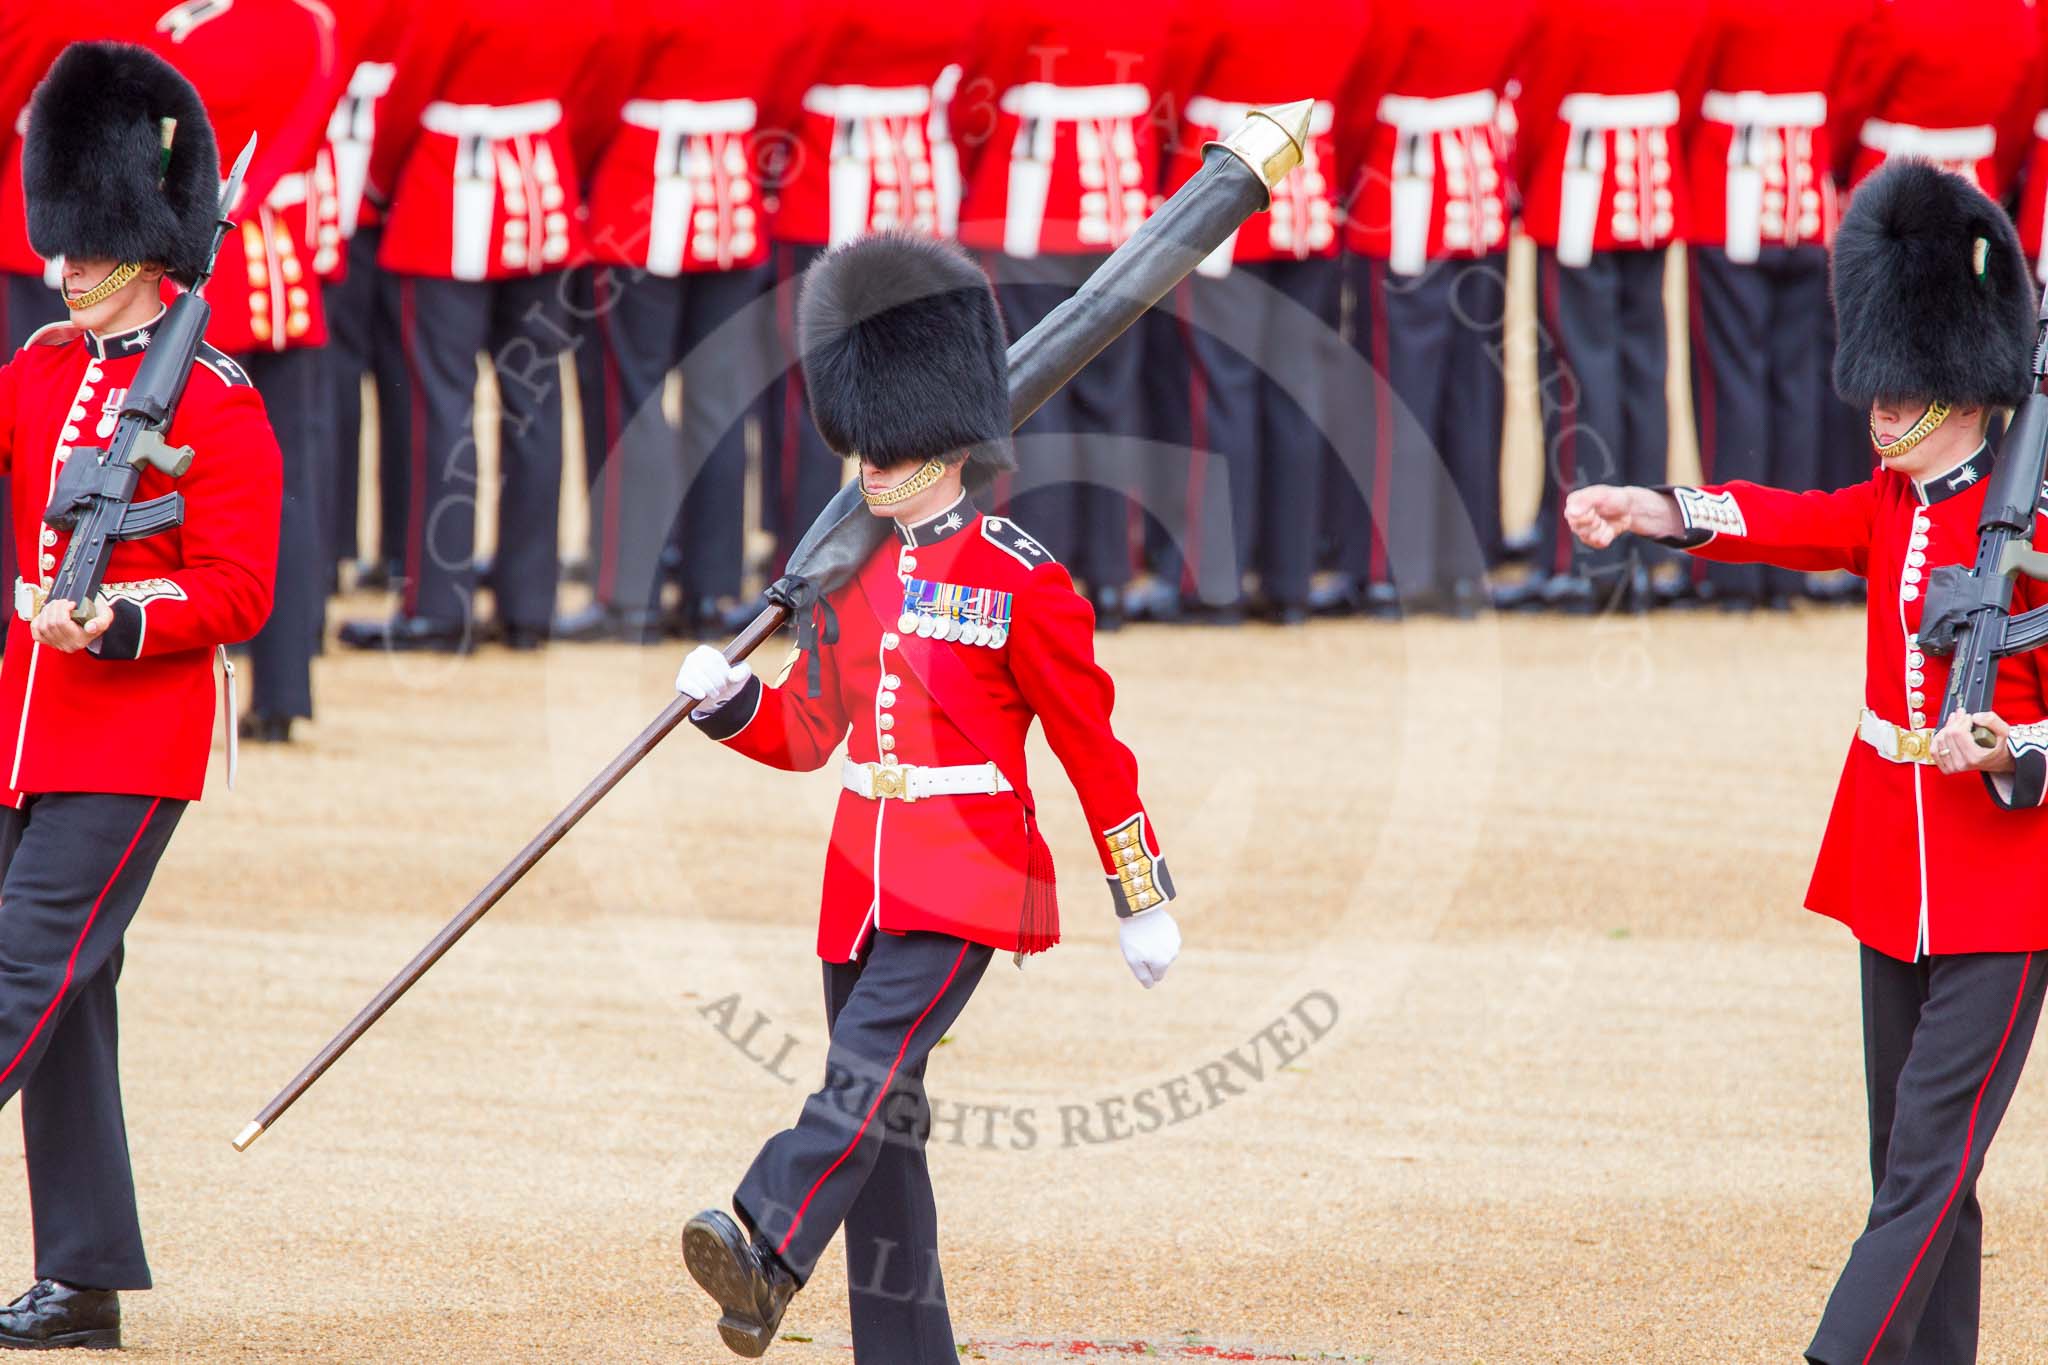 Trooping the Colour 2013: The Colour Party has reached their position on Horse Guards Parade - Colour Sergeant R J Heath, Welsh Guards, carrying the Colour, and the two sentries. Image #113, 15 June 2013 10:31 Horse Guards Parade, London, UK